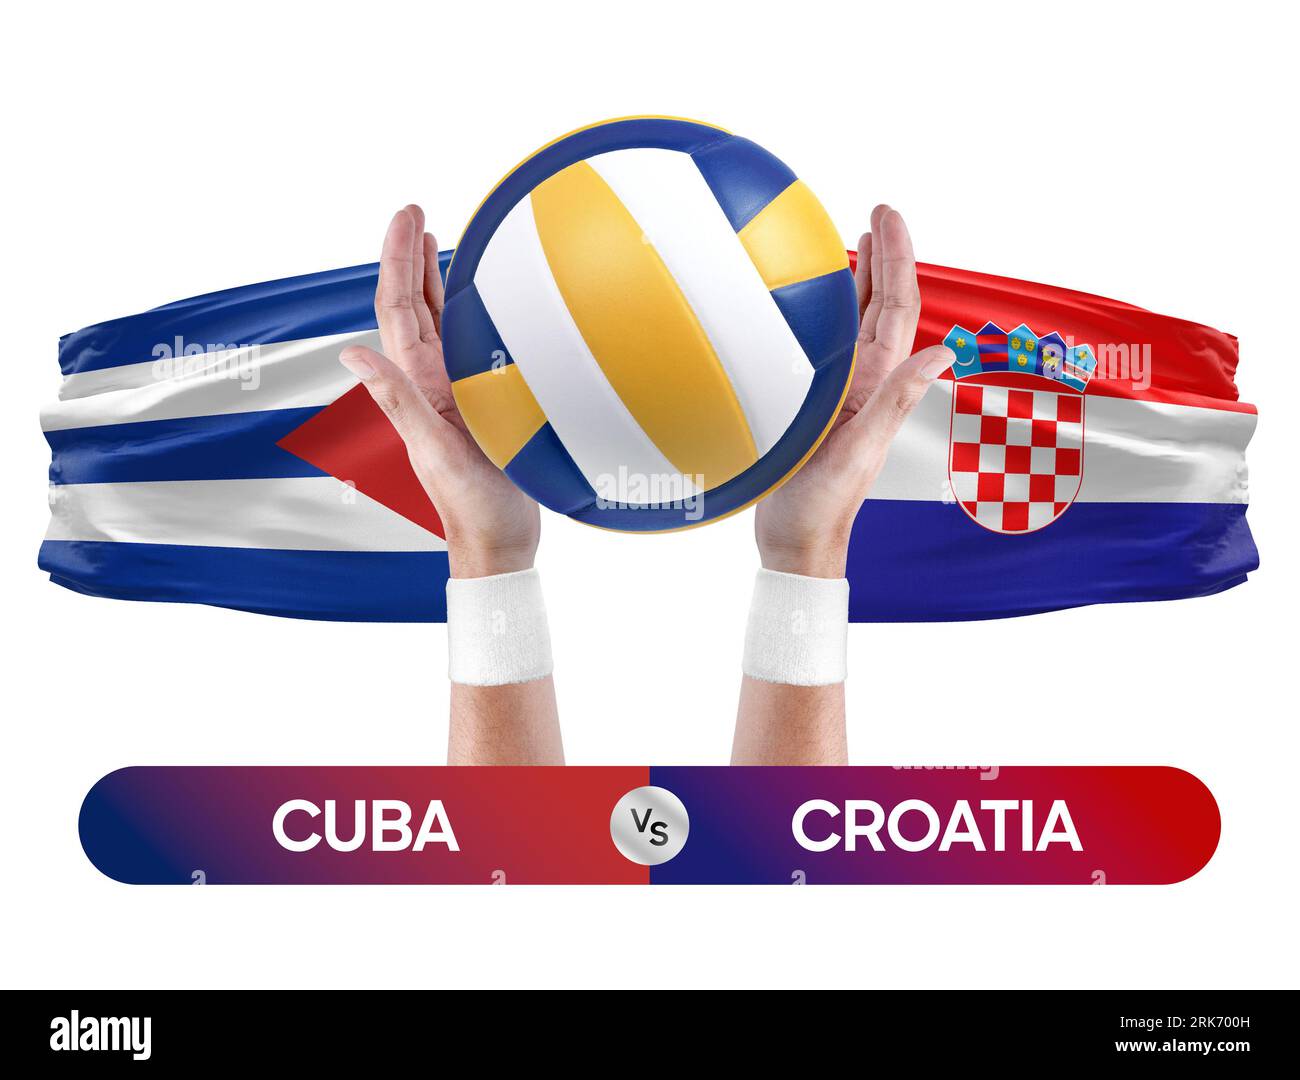 Cuba vs Croatia national teams volleyball volley ball match competition concept. Stock Photo